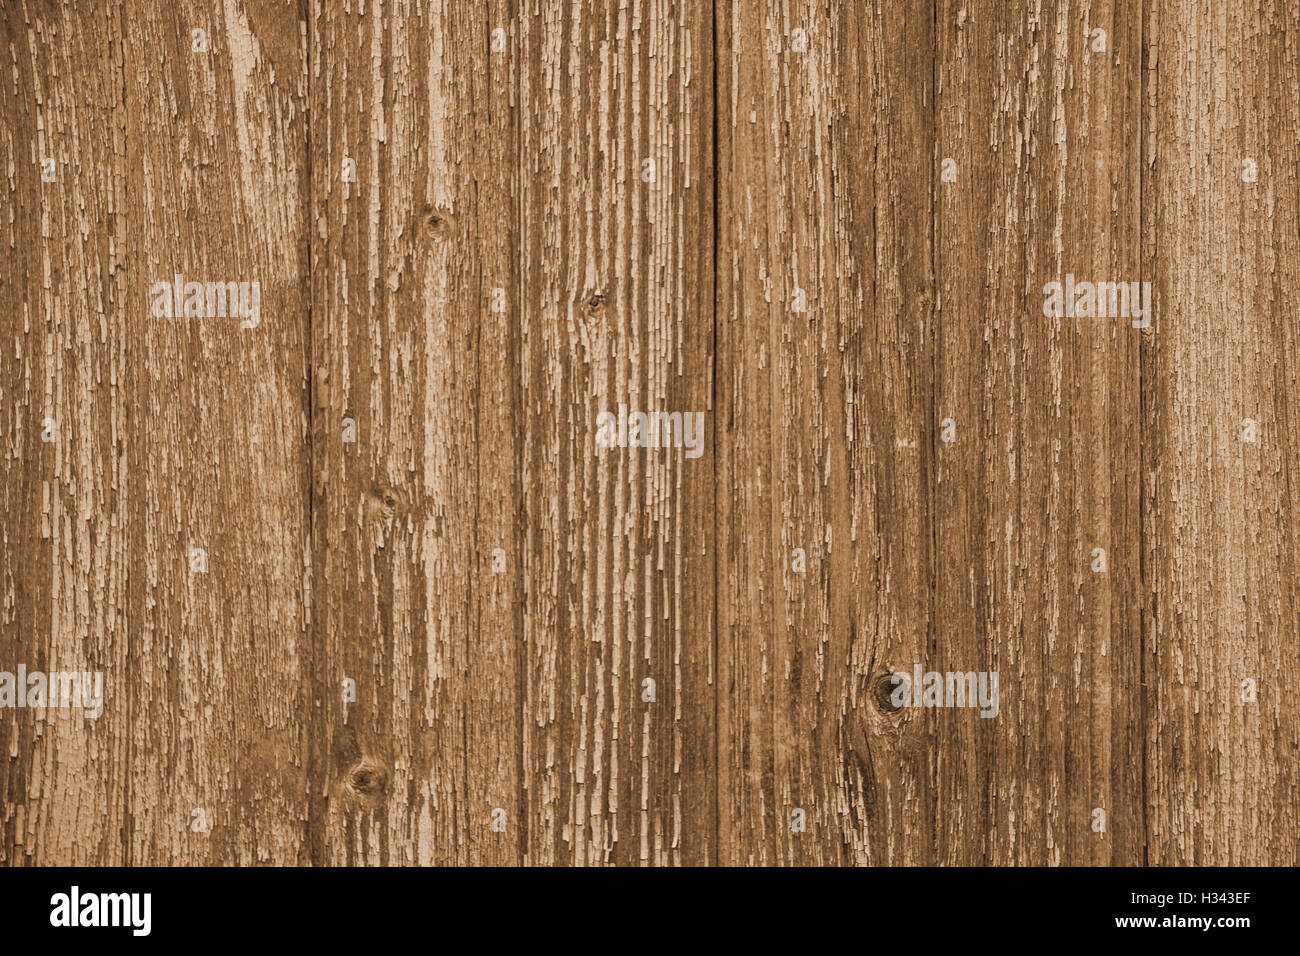 Wooden plank background, warm light-brown color, vertical boards, wood texture, old table (floor, wall), vintage. Stock Photo